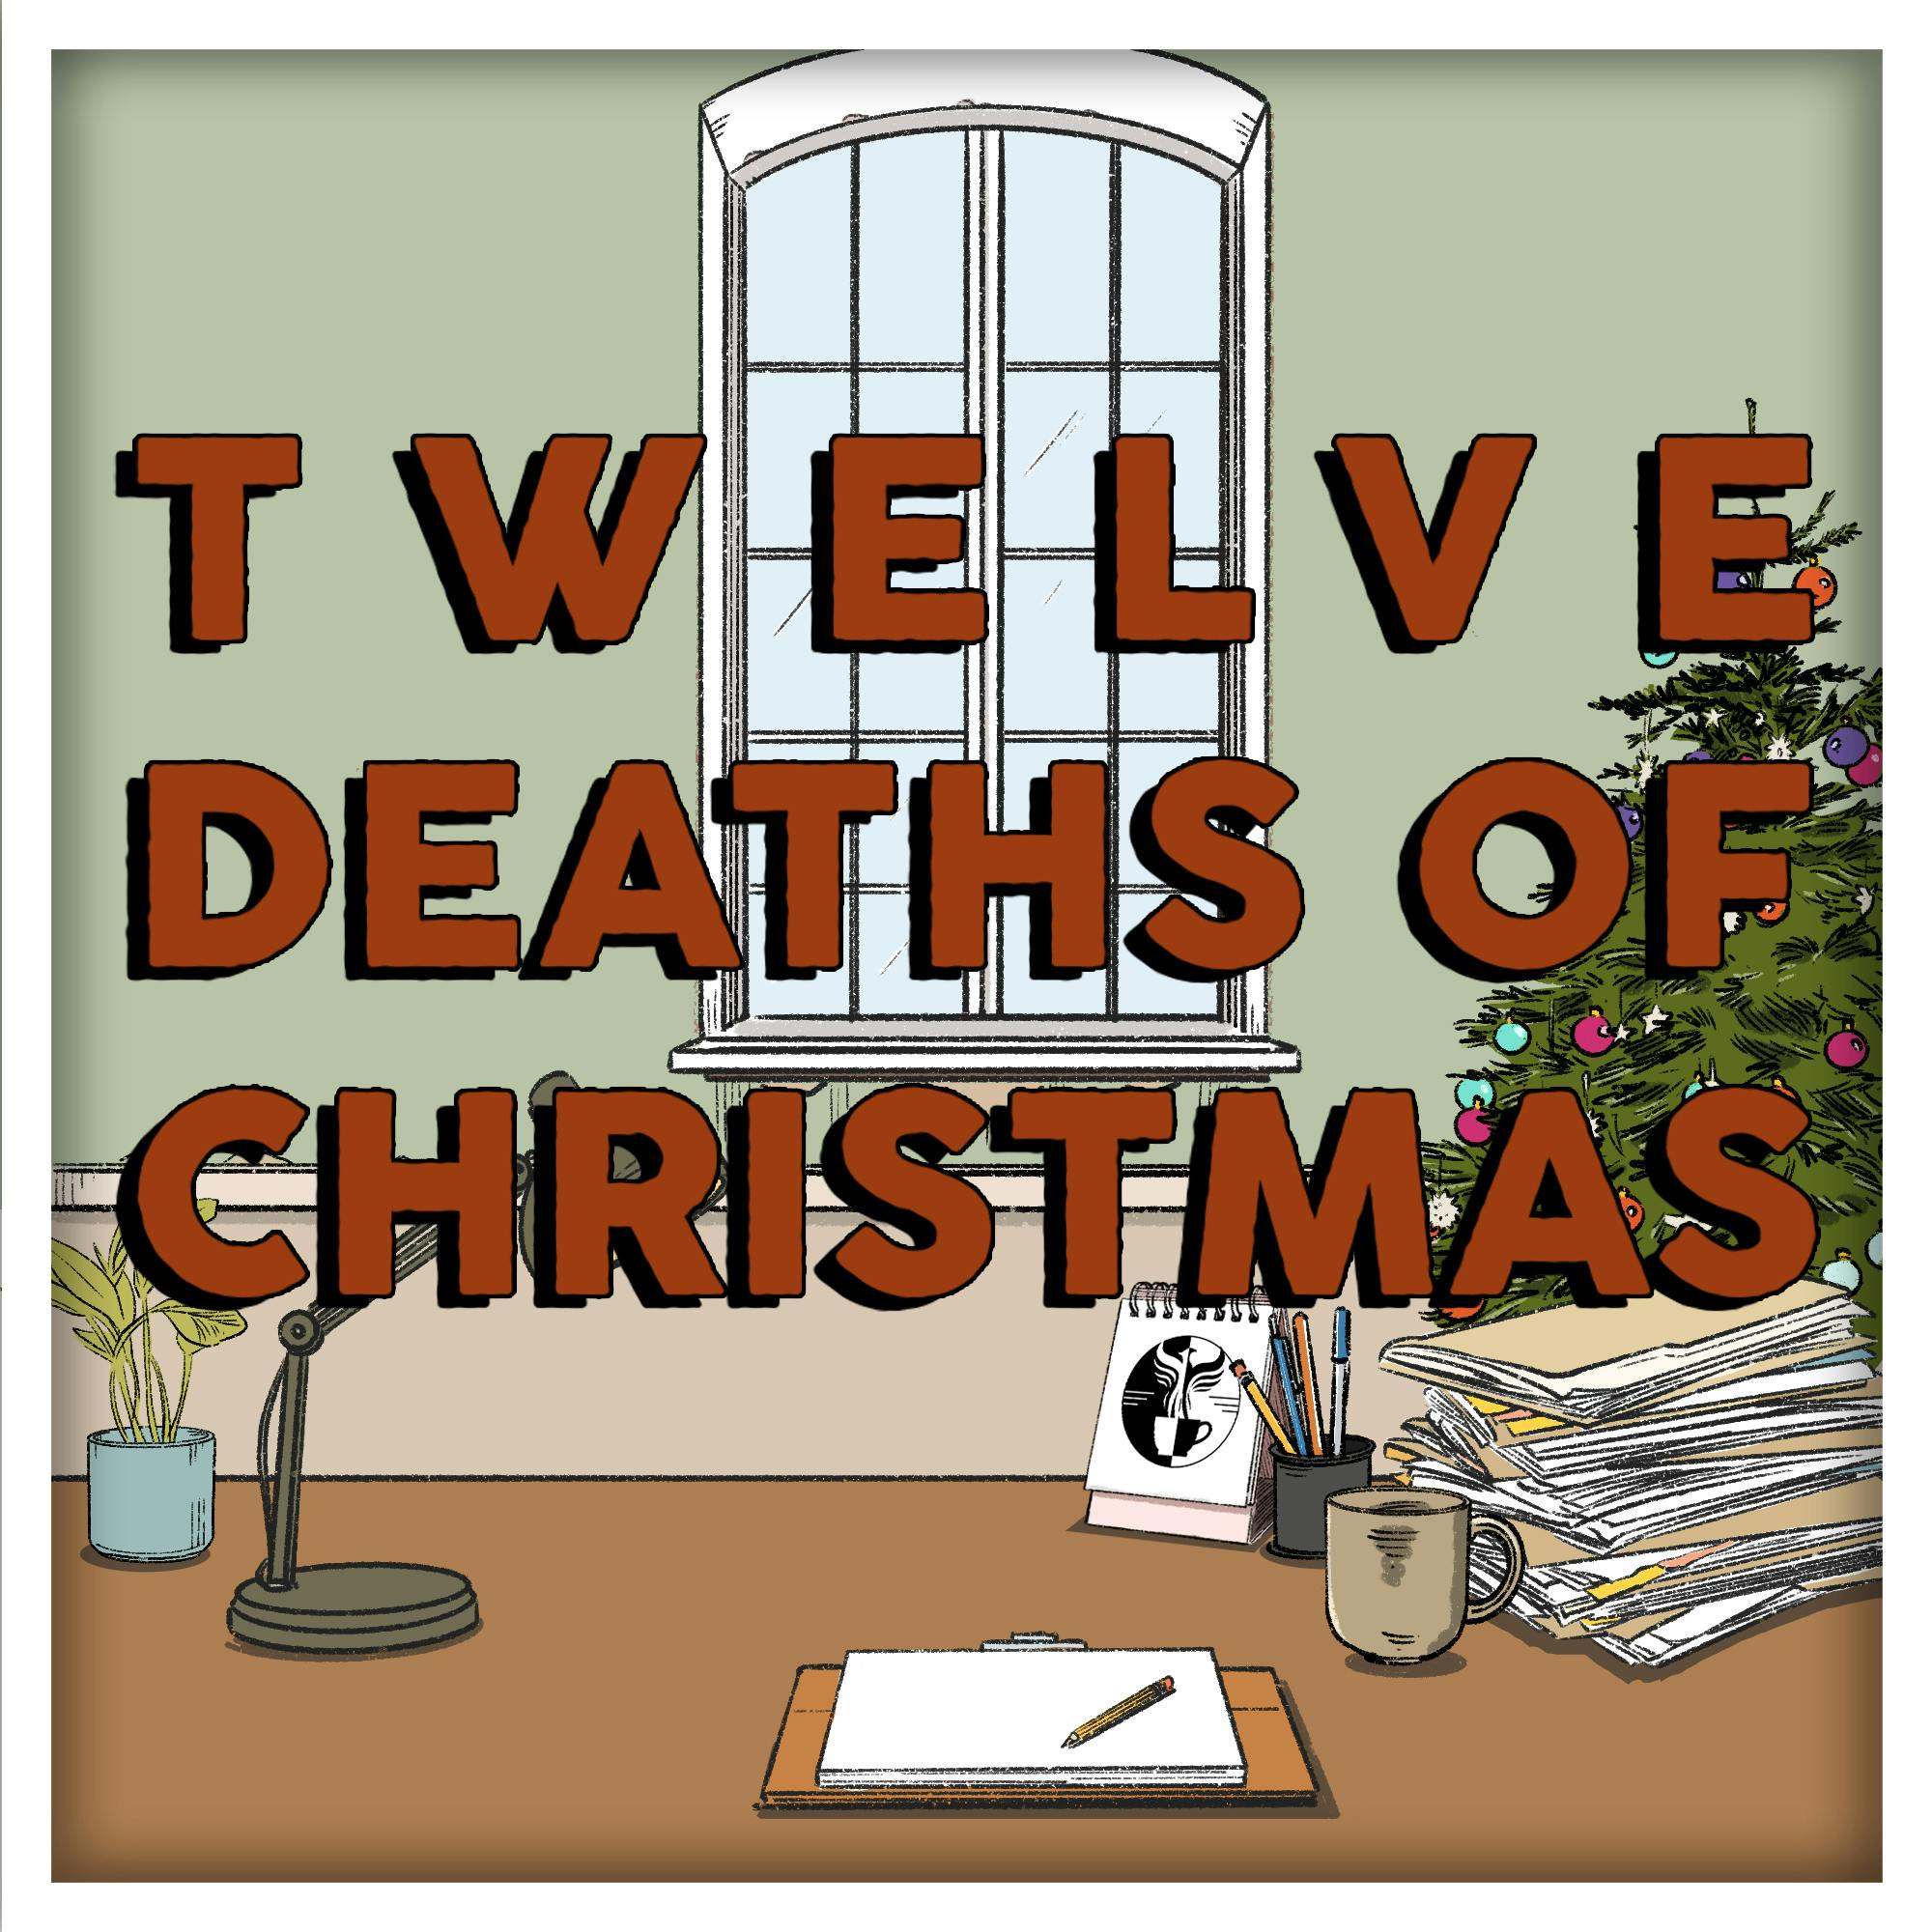 The 12 Deaths of Christmas